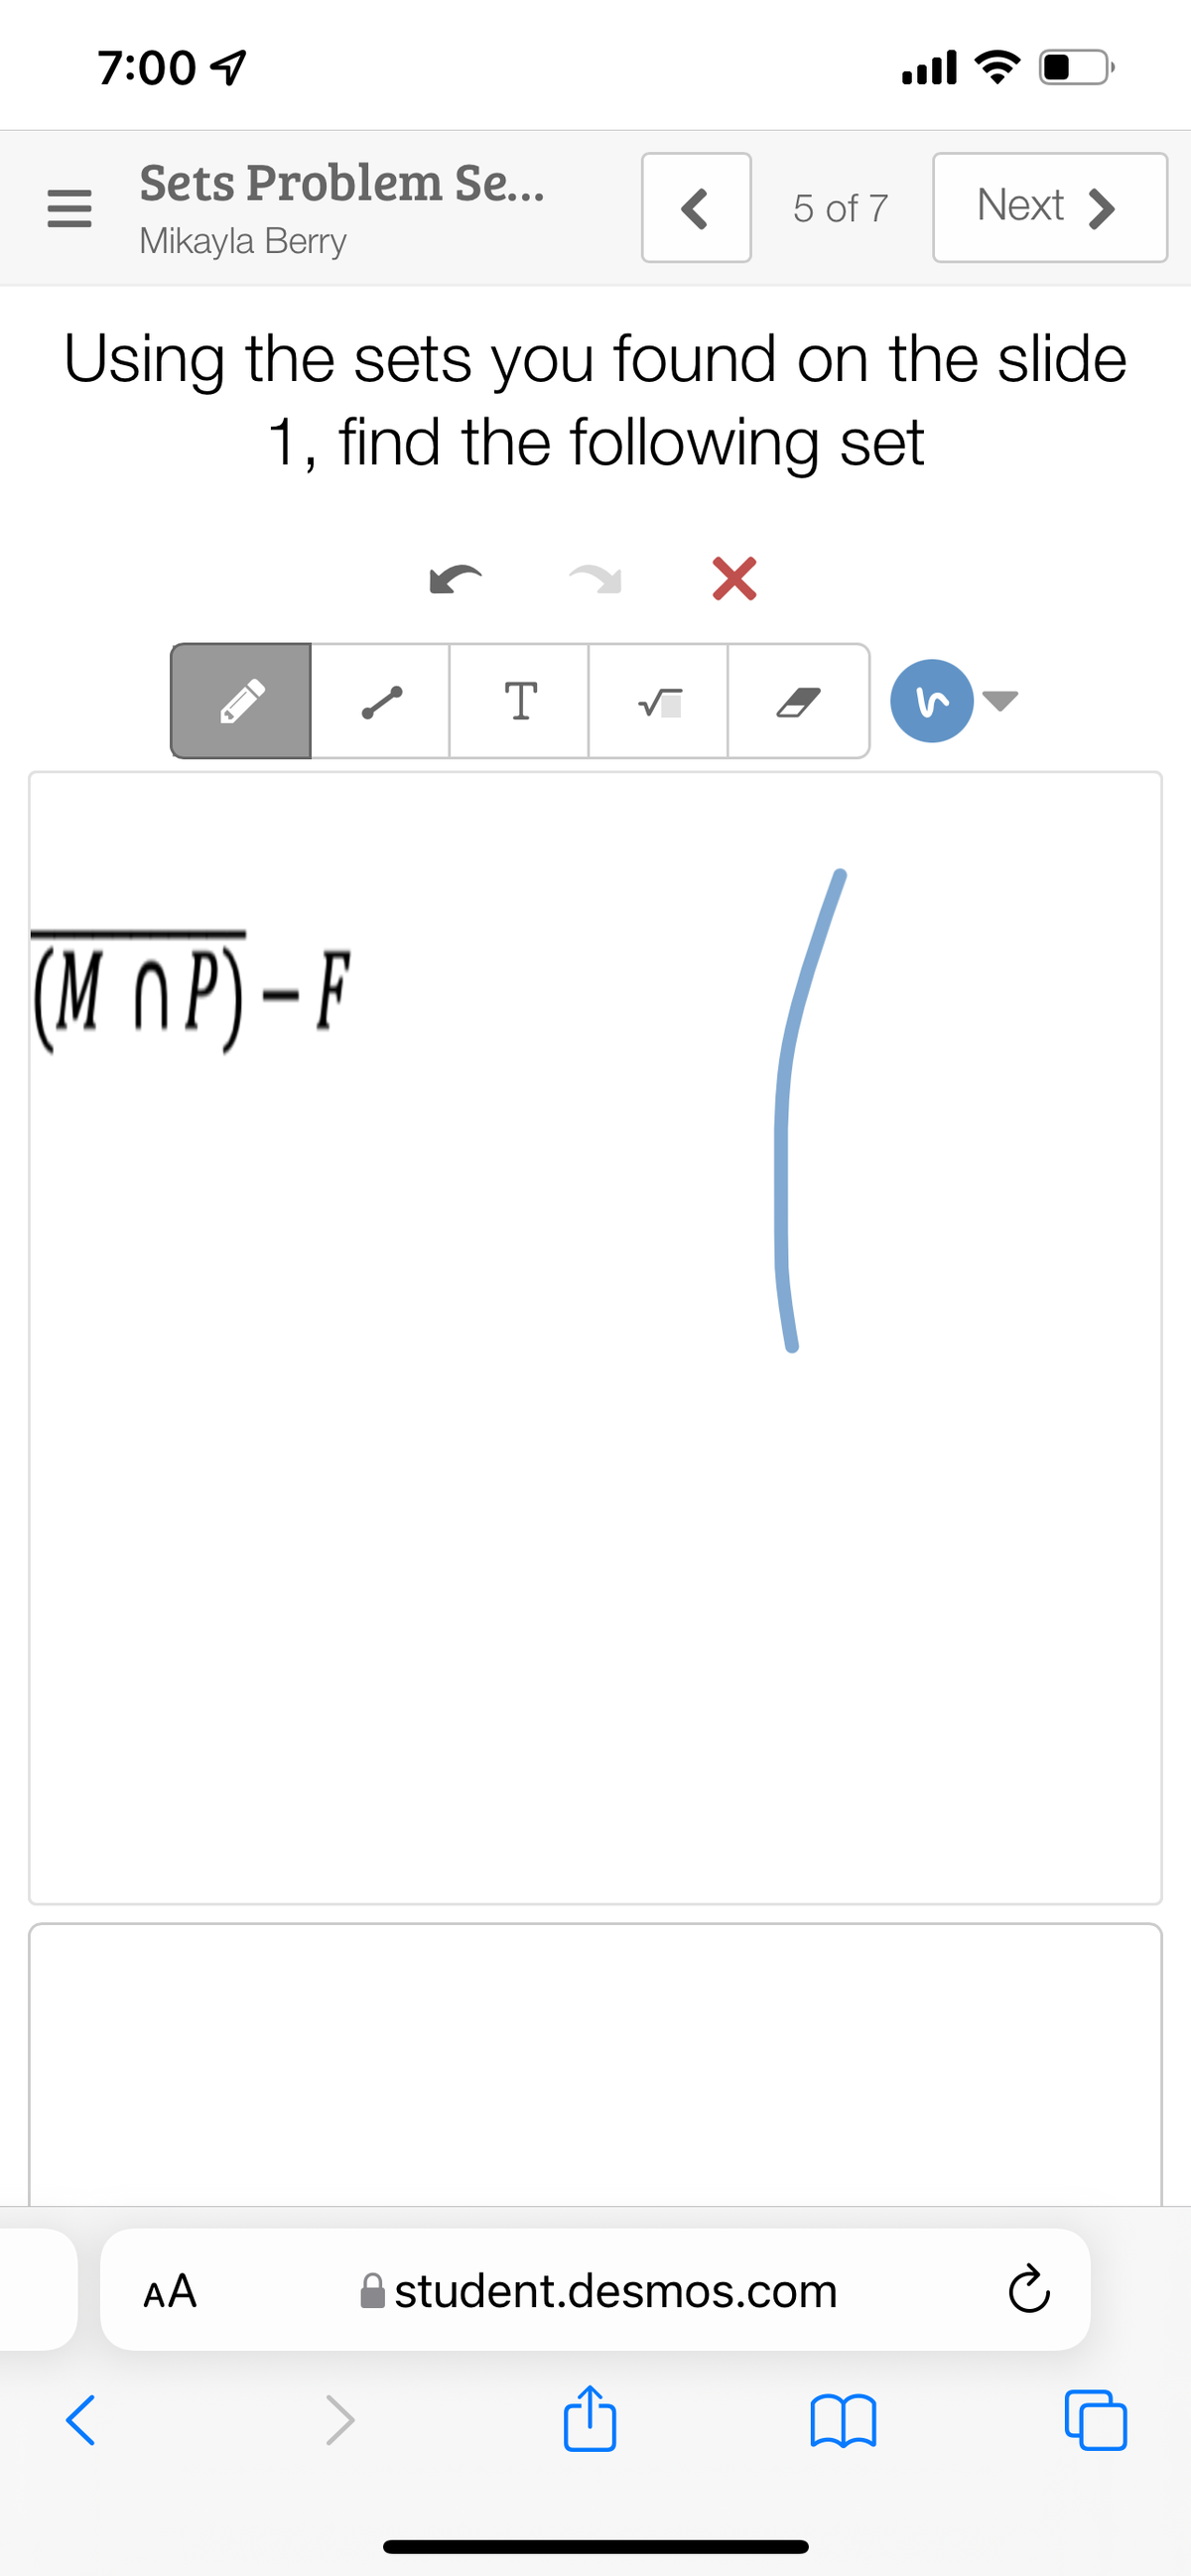 7:00 4
ll
Sets Problem Se...
5 of 7
Next >
Mikayla Berry
Using the sets you found on the slide
1, find the following set
T
(M OP) - F
AA
student.desmos.com
